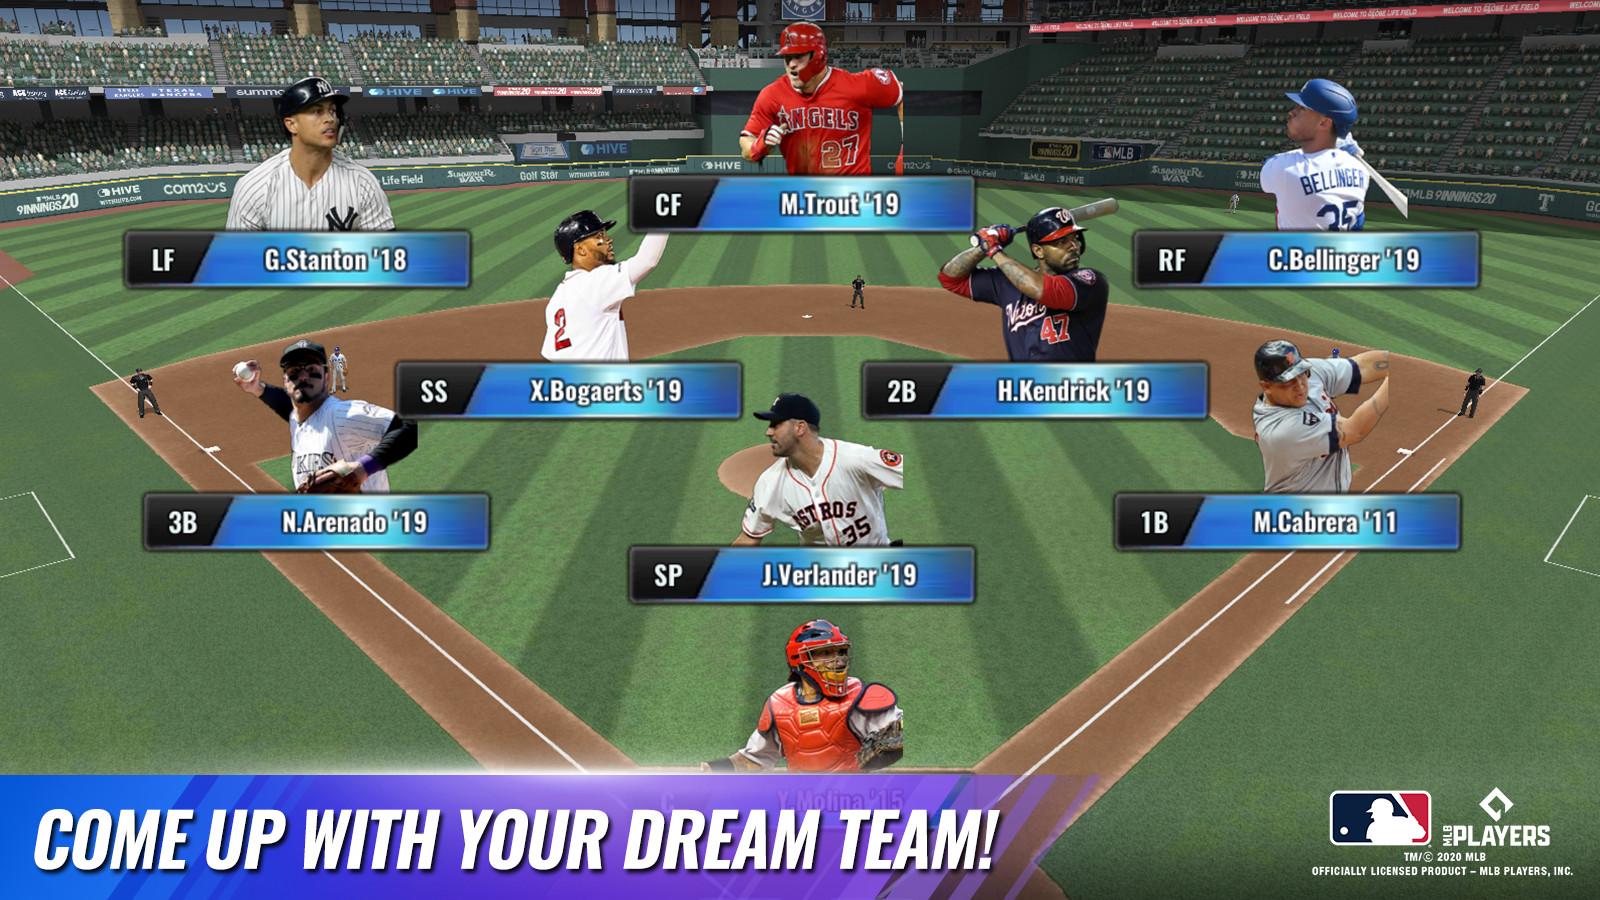 MLB 9 Innings 20 for Android - APK Download